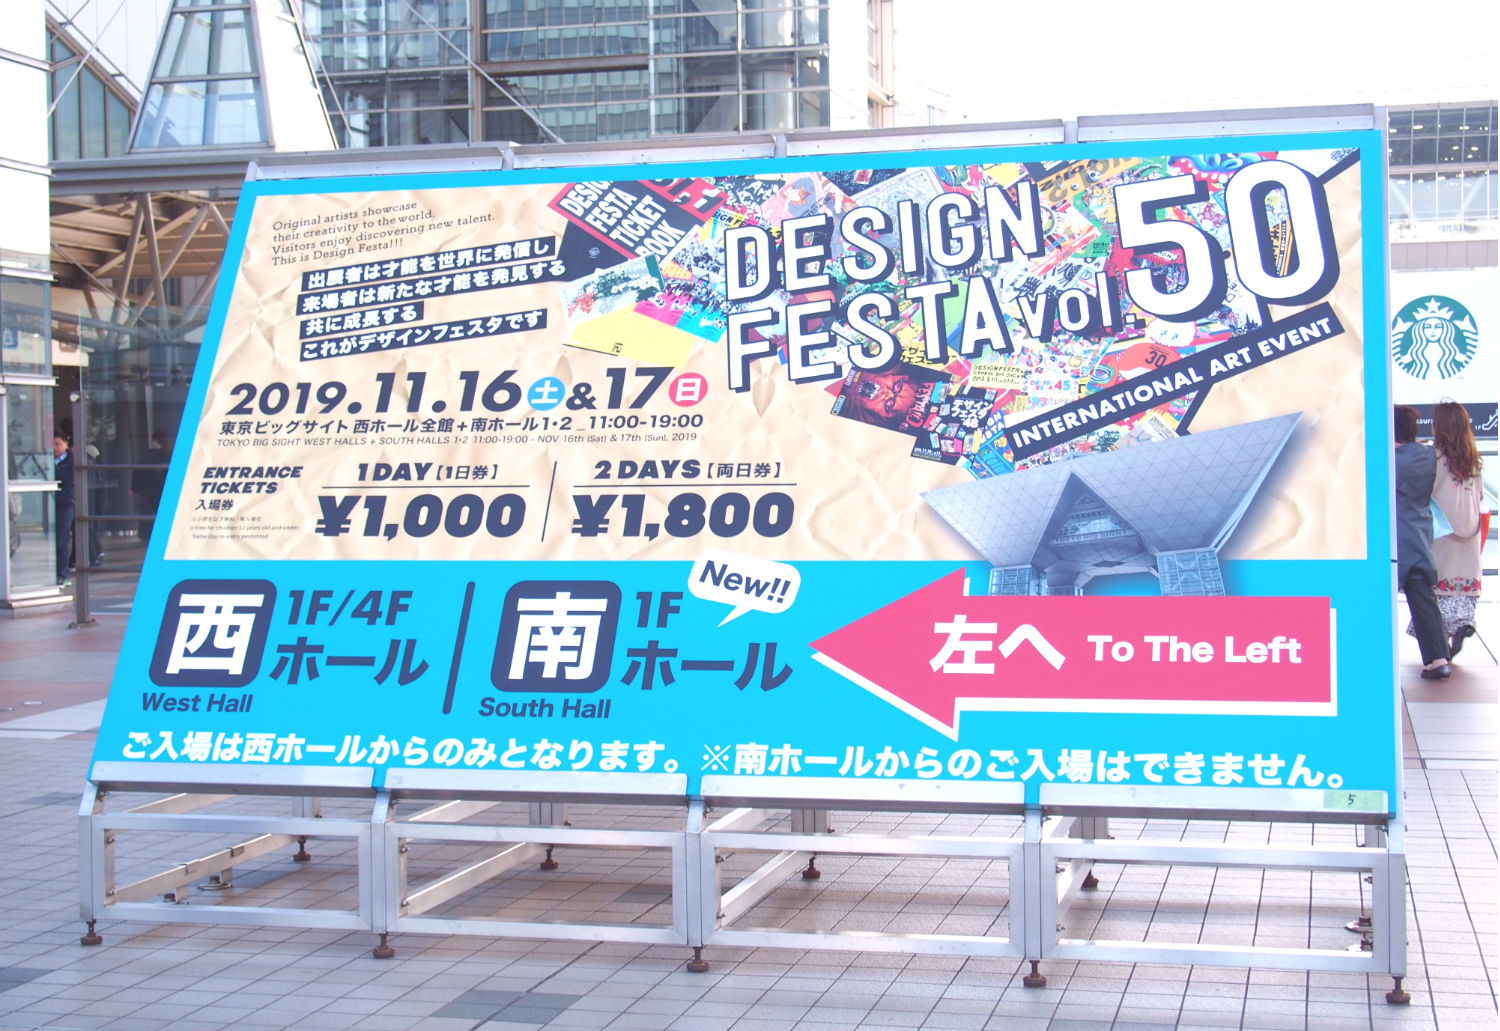 Went to DESIGN FESTA Tokyo 50 (2019 Autumn)! It was an exiting event